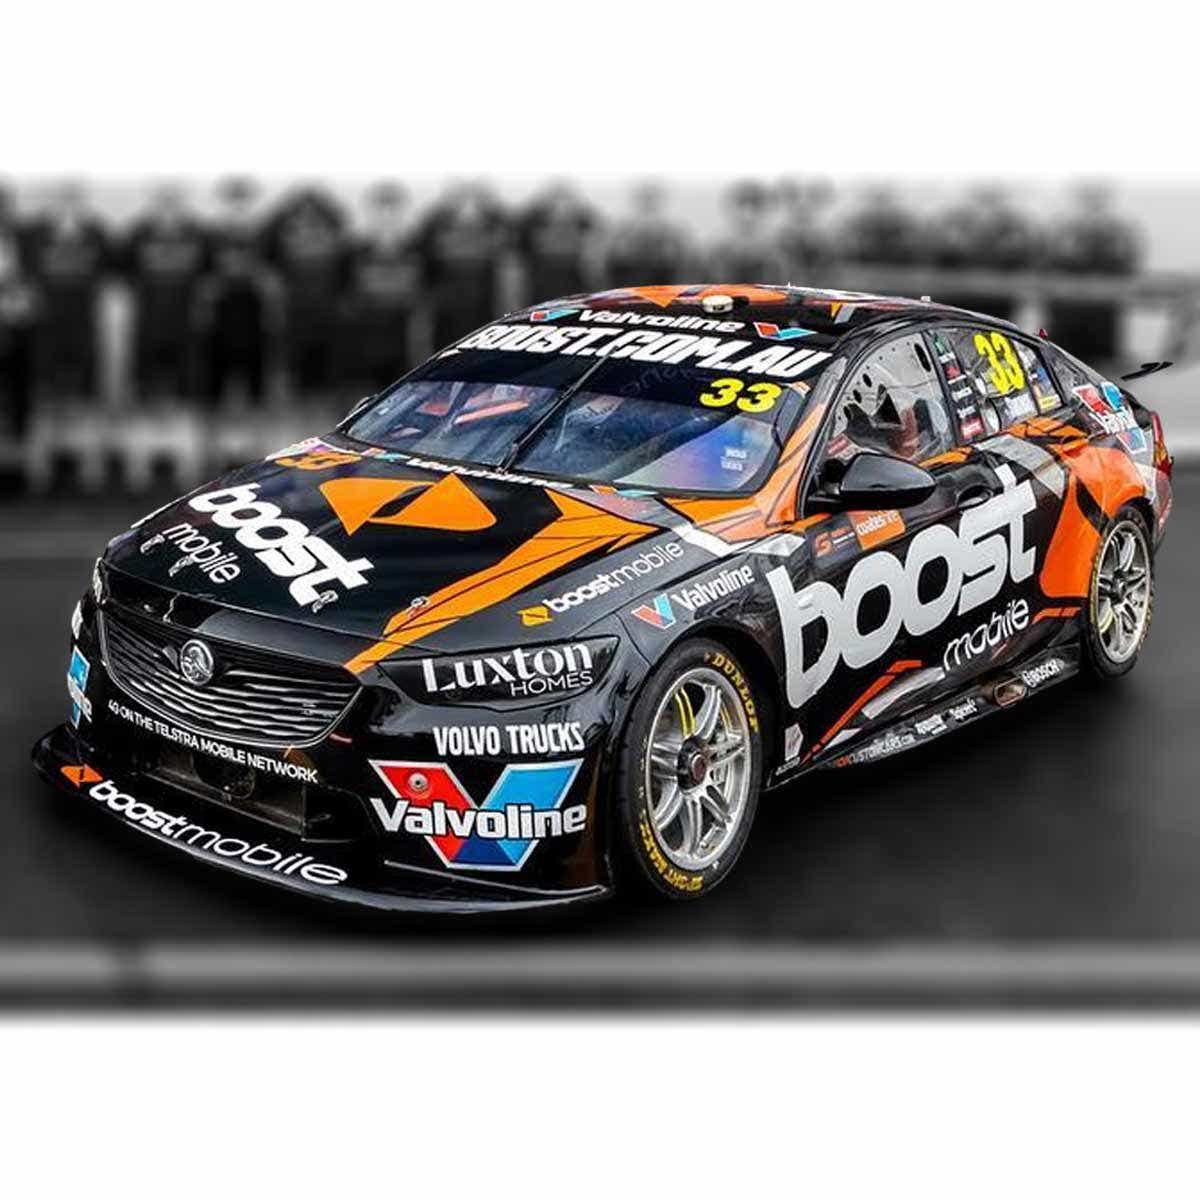 Holden ZB Commodore Supercar - 2019 Newcastle 500 - #33 Richie Stanaway - 1:18 Model Car